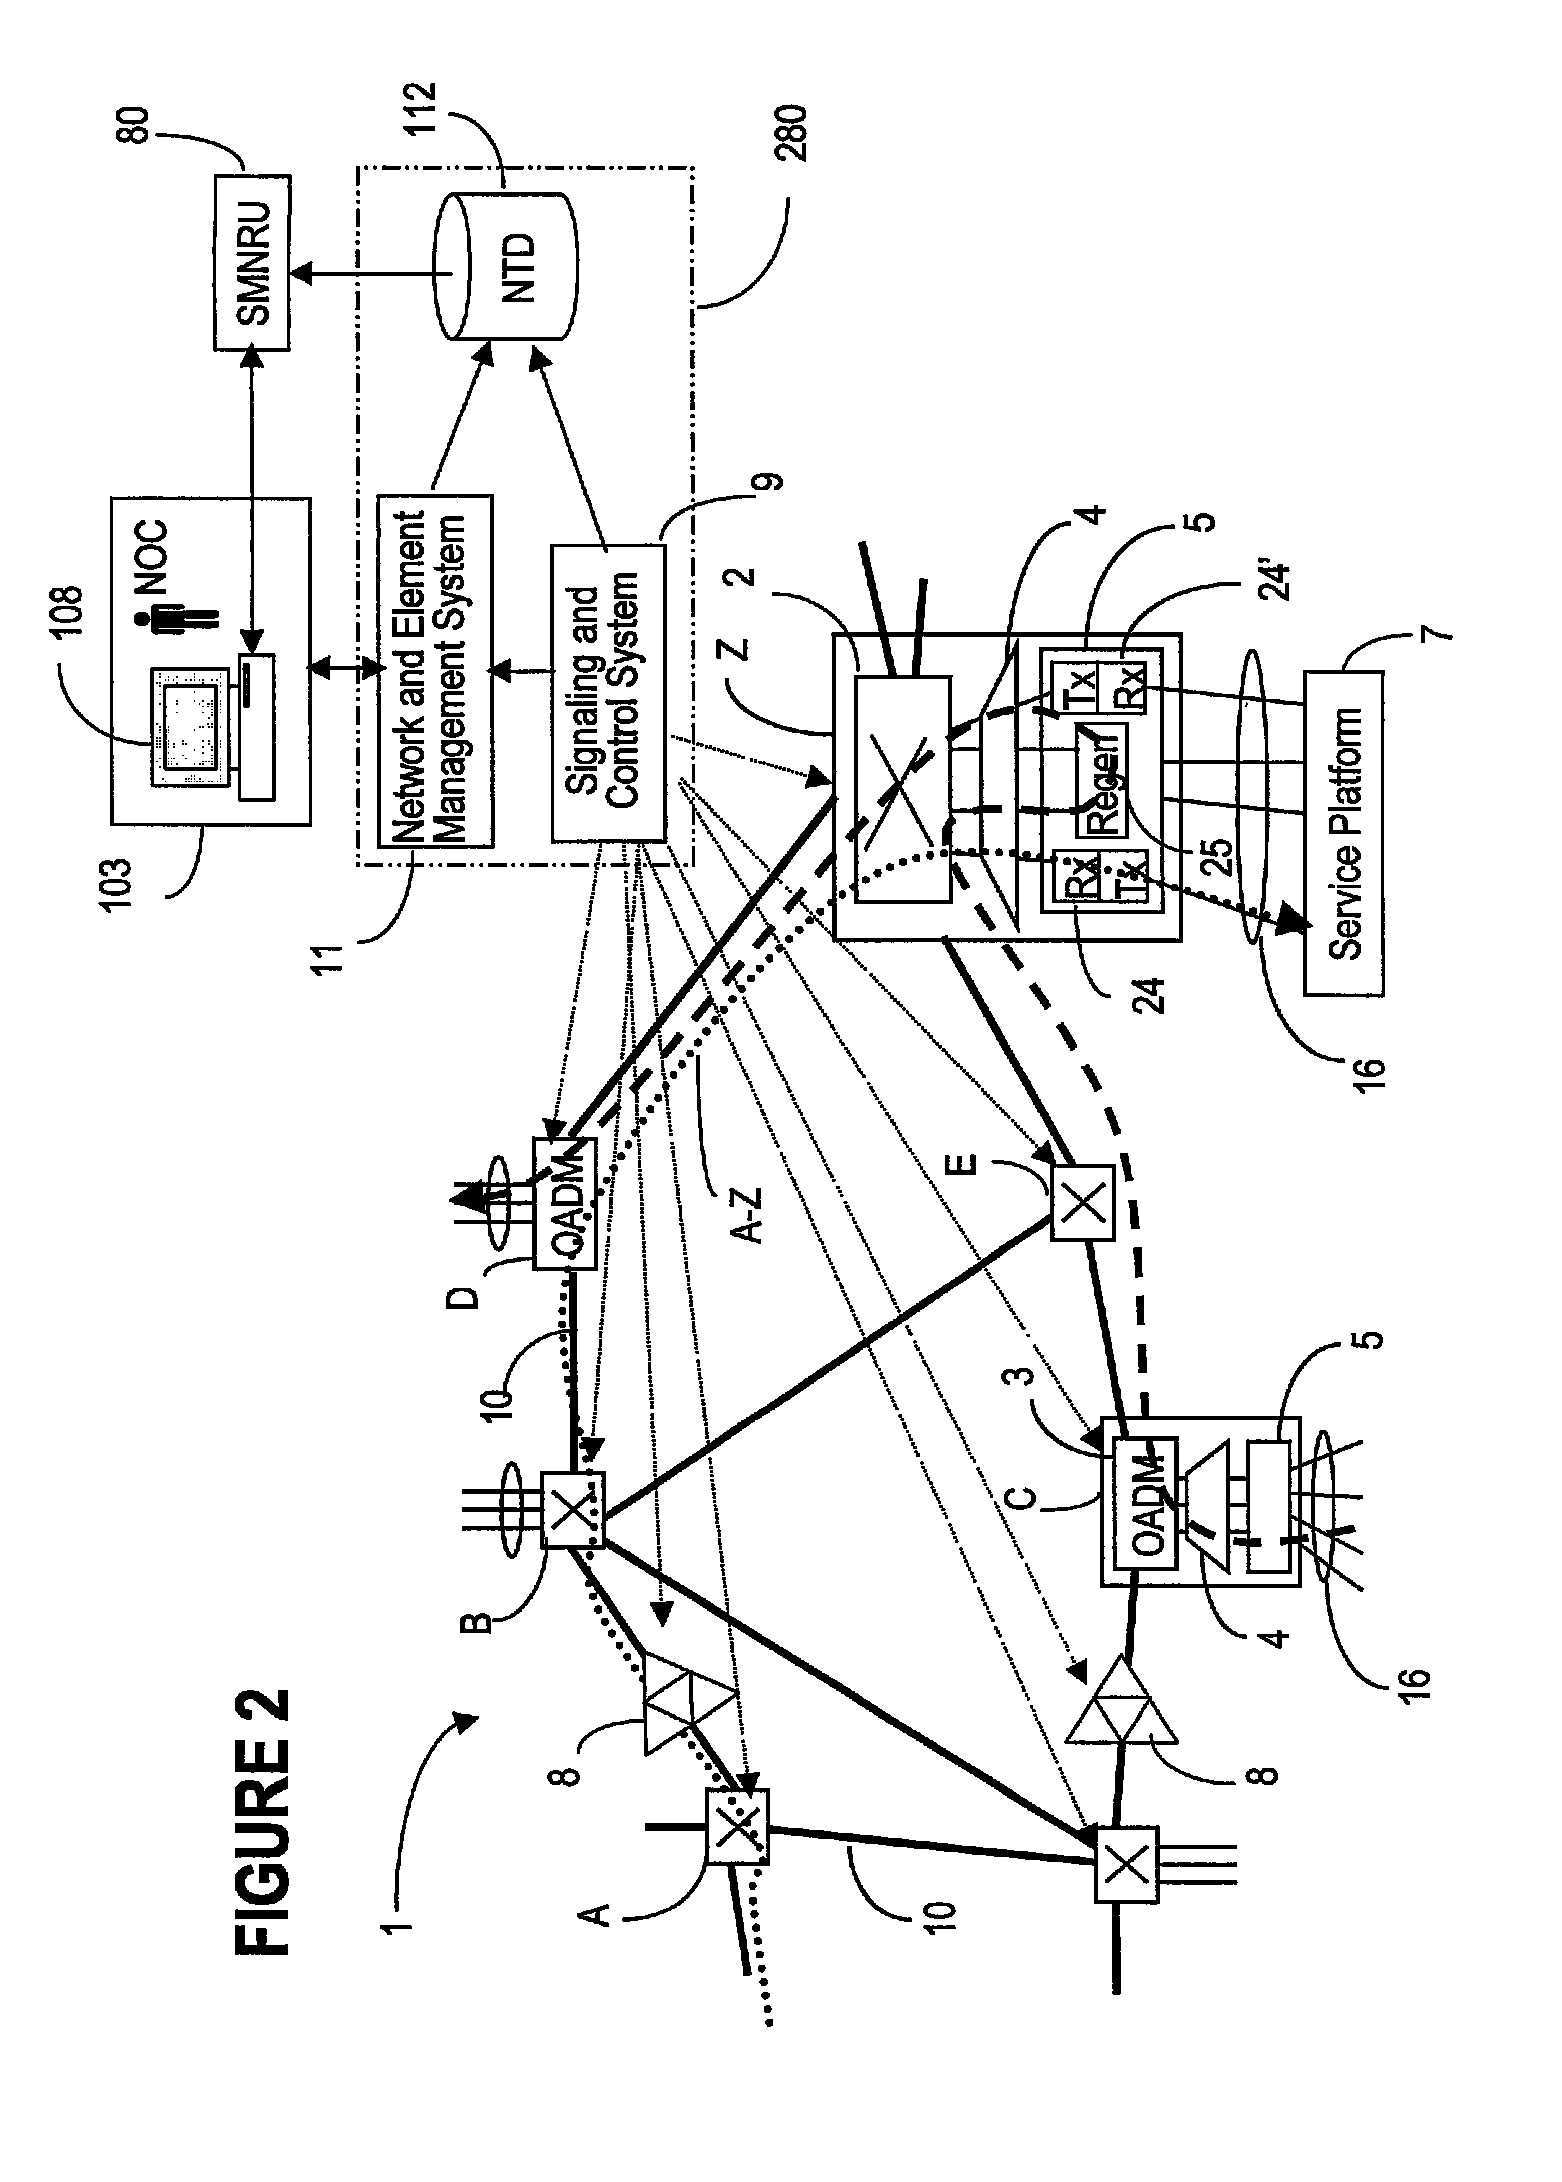 Method and system for monitoring network resources utilization